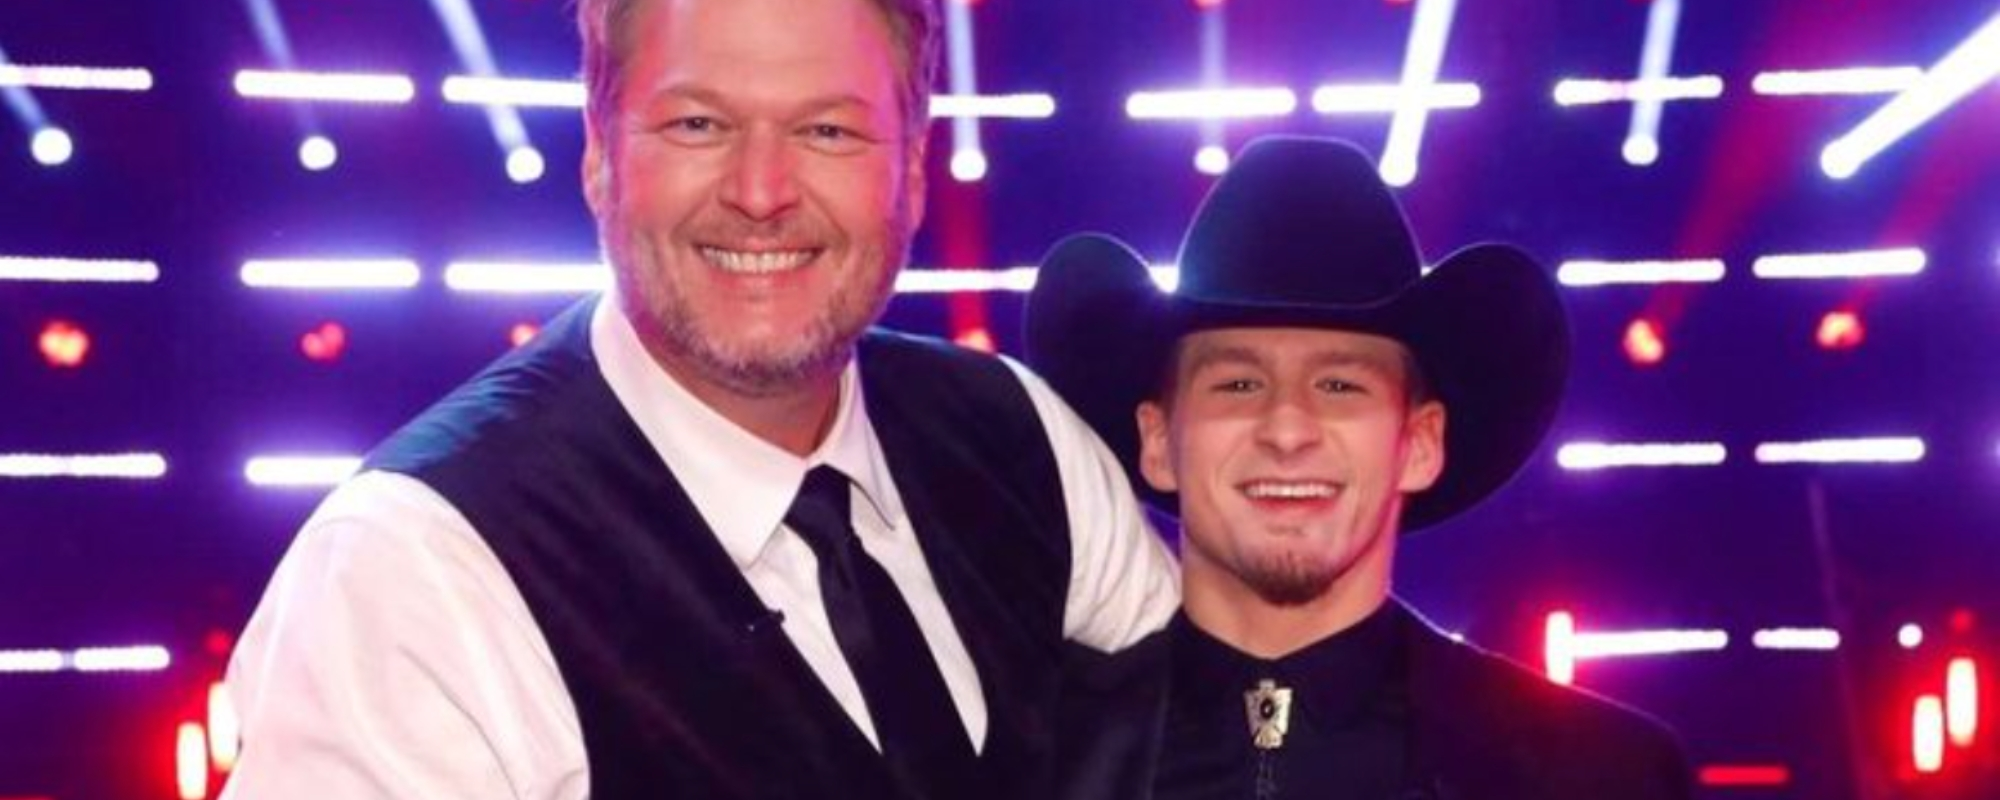 Where Are They Now? The Voice Winner Bryce Leatherwood From Team Blake Shelton